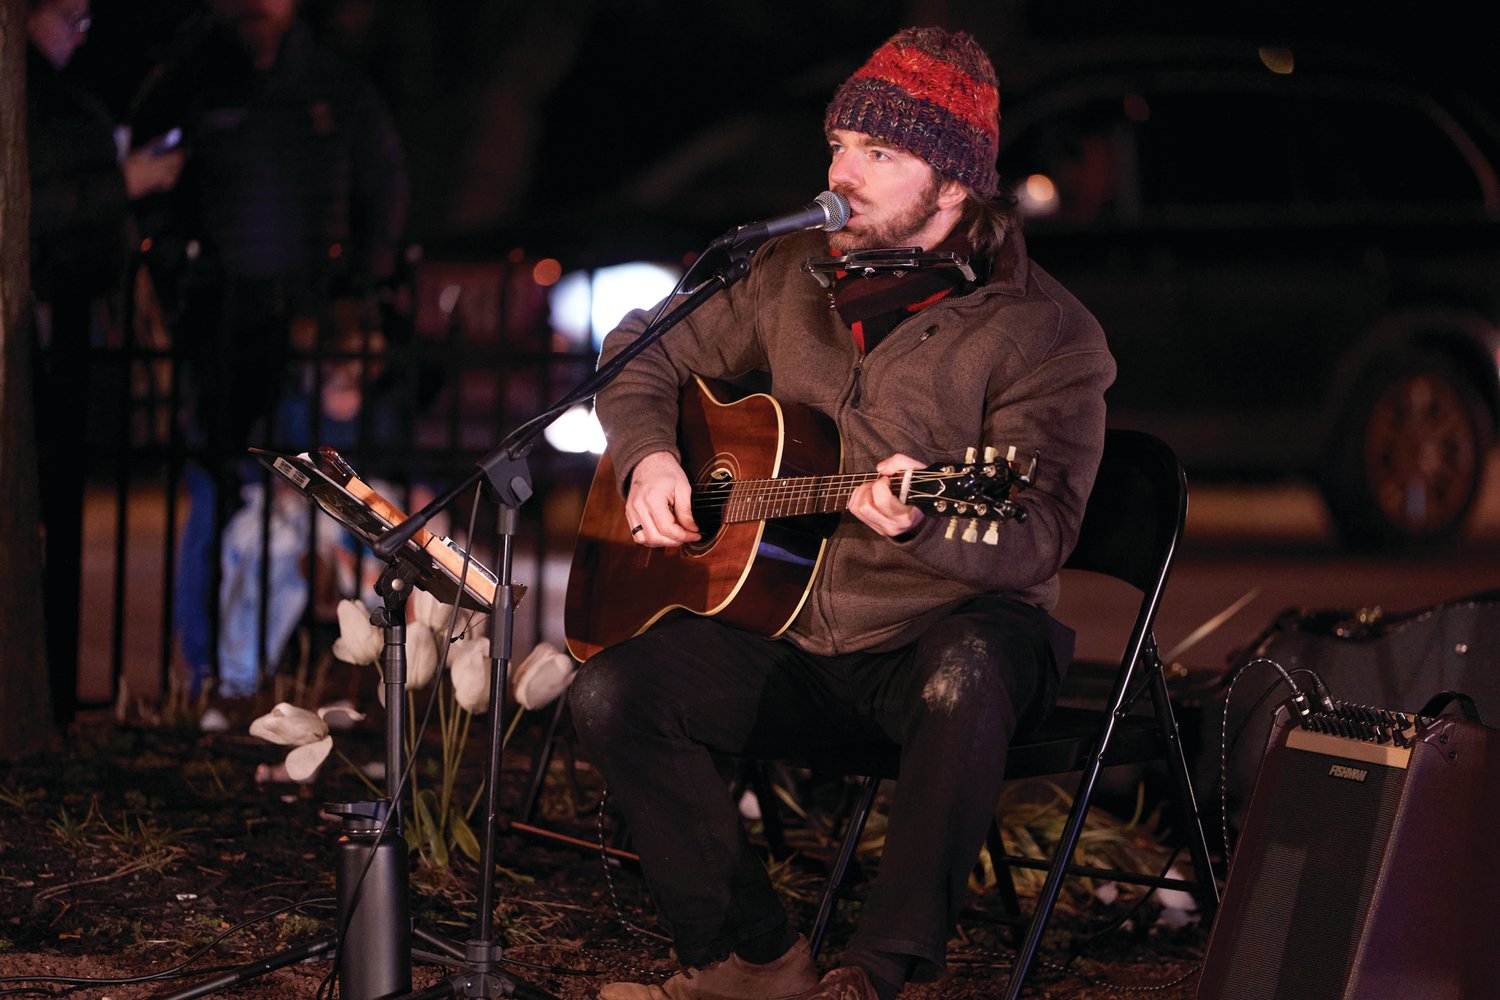 Greg McGarvey from Hopewell, NJ performed at Bristol’s Mill Street Fire & Ice Event Friday, Jan. 20, 2023 in Bristol Borough.